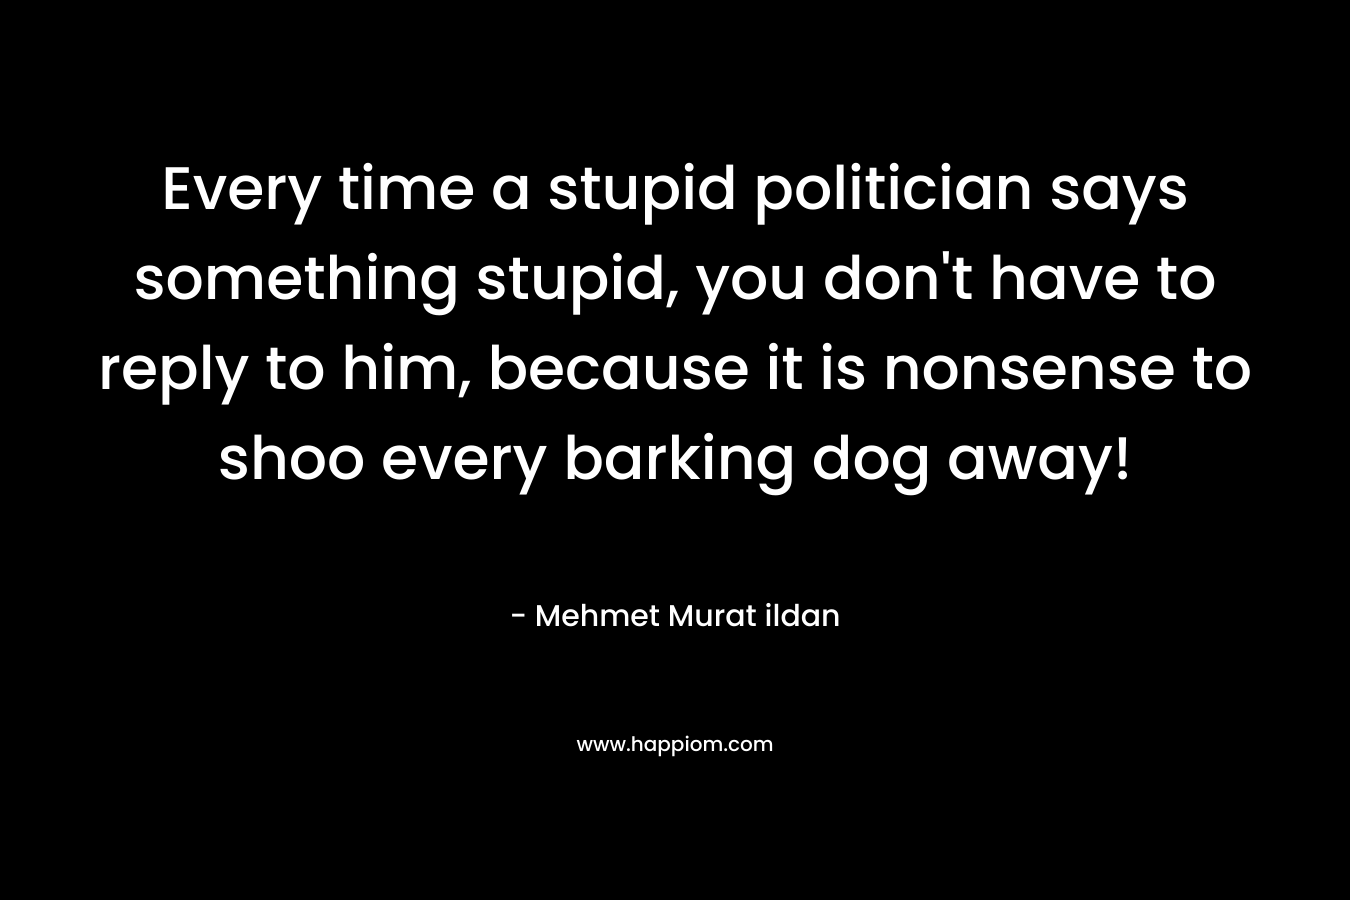 Every time a stupid politician says something stupid, you don’t have to reply to him, because it is nonsense to shoo every barking dog away! – Mehmet Murat ildan